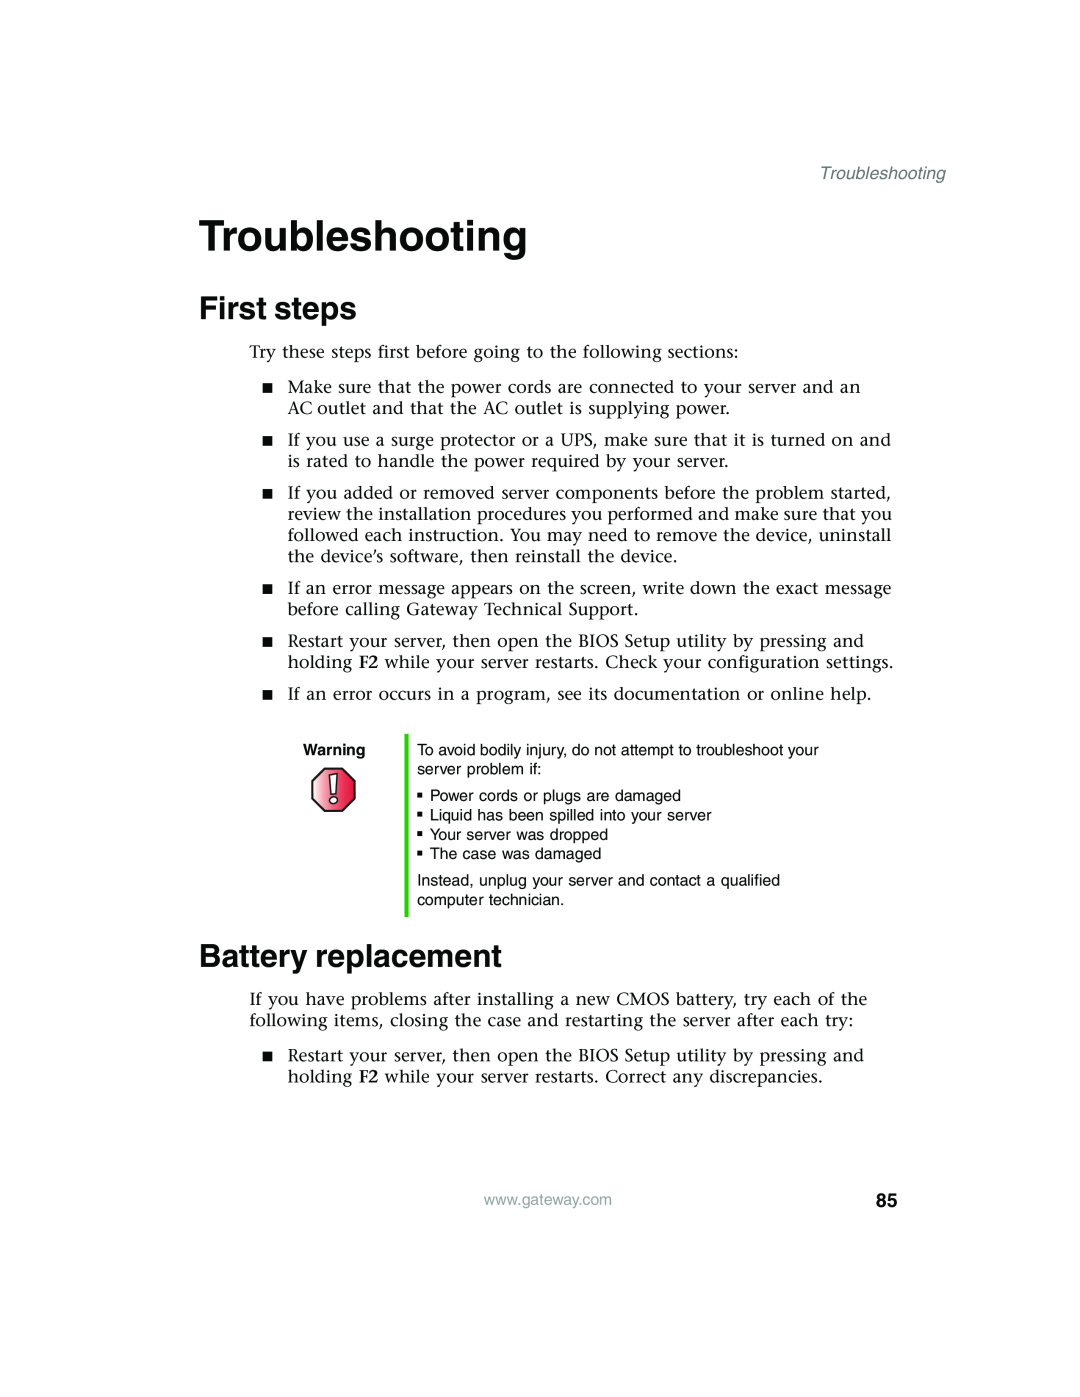 Gateway 980 manual Troubleshooting, First steps, Battery replacement 